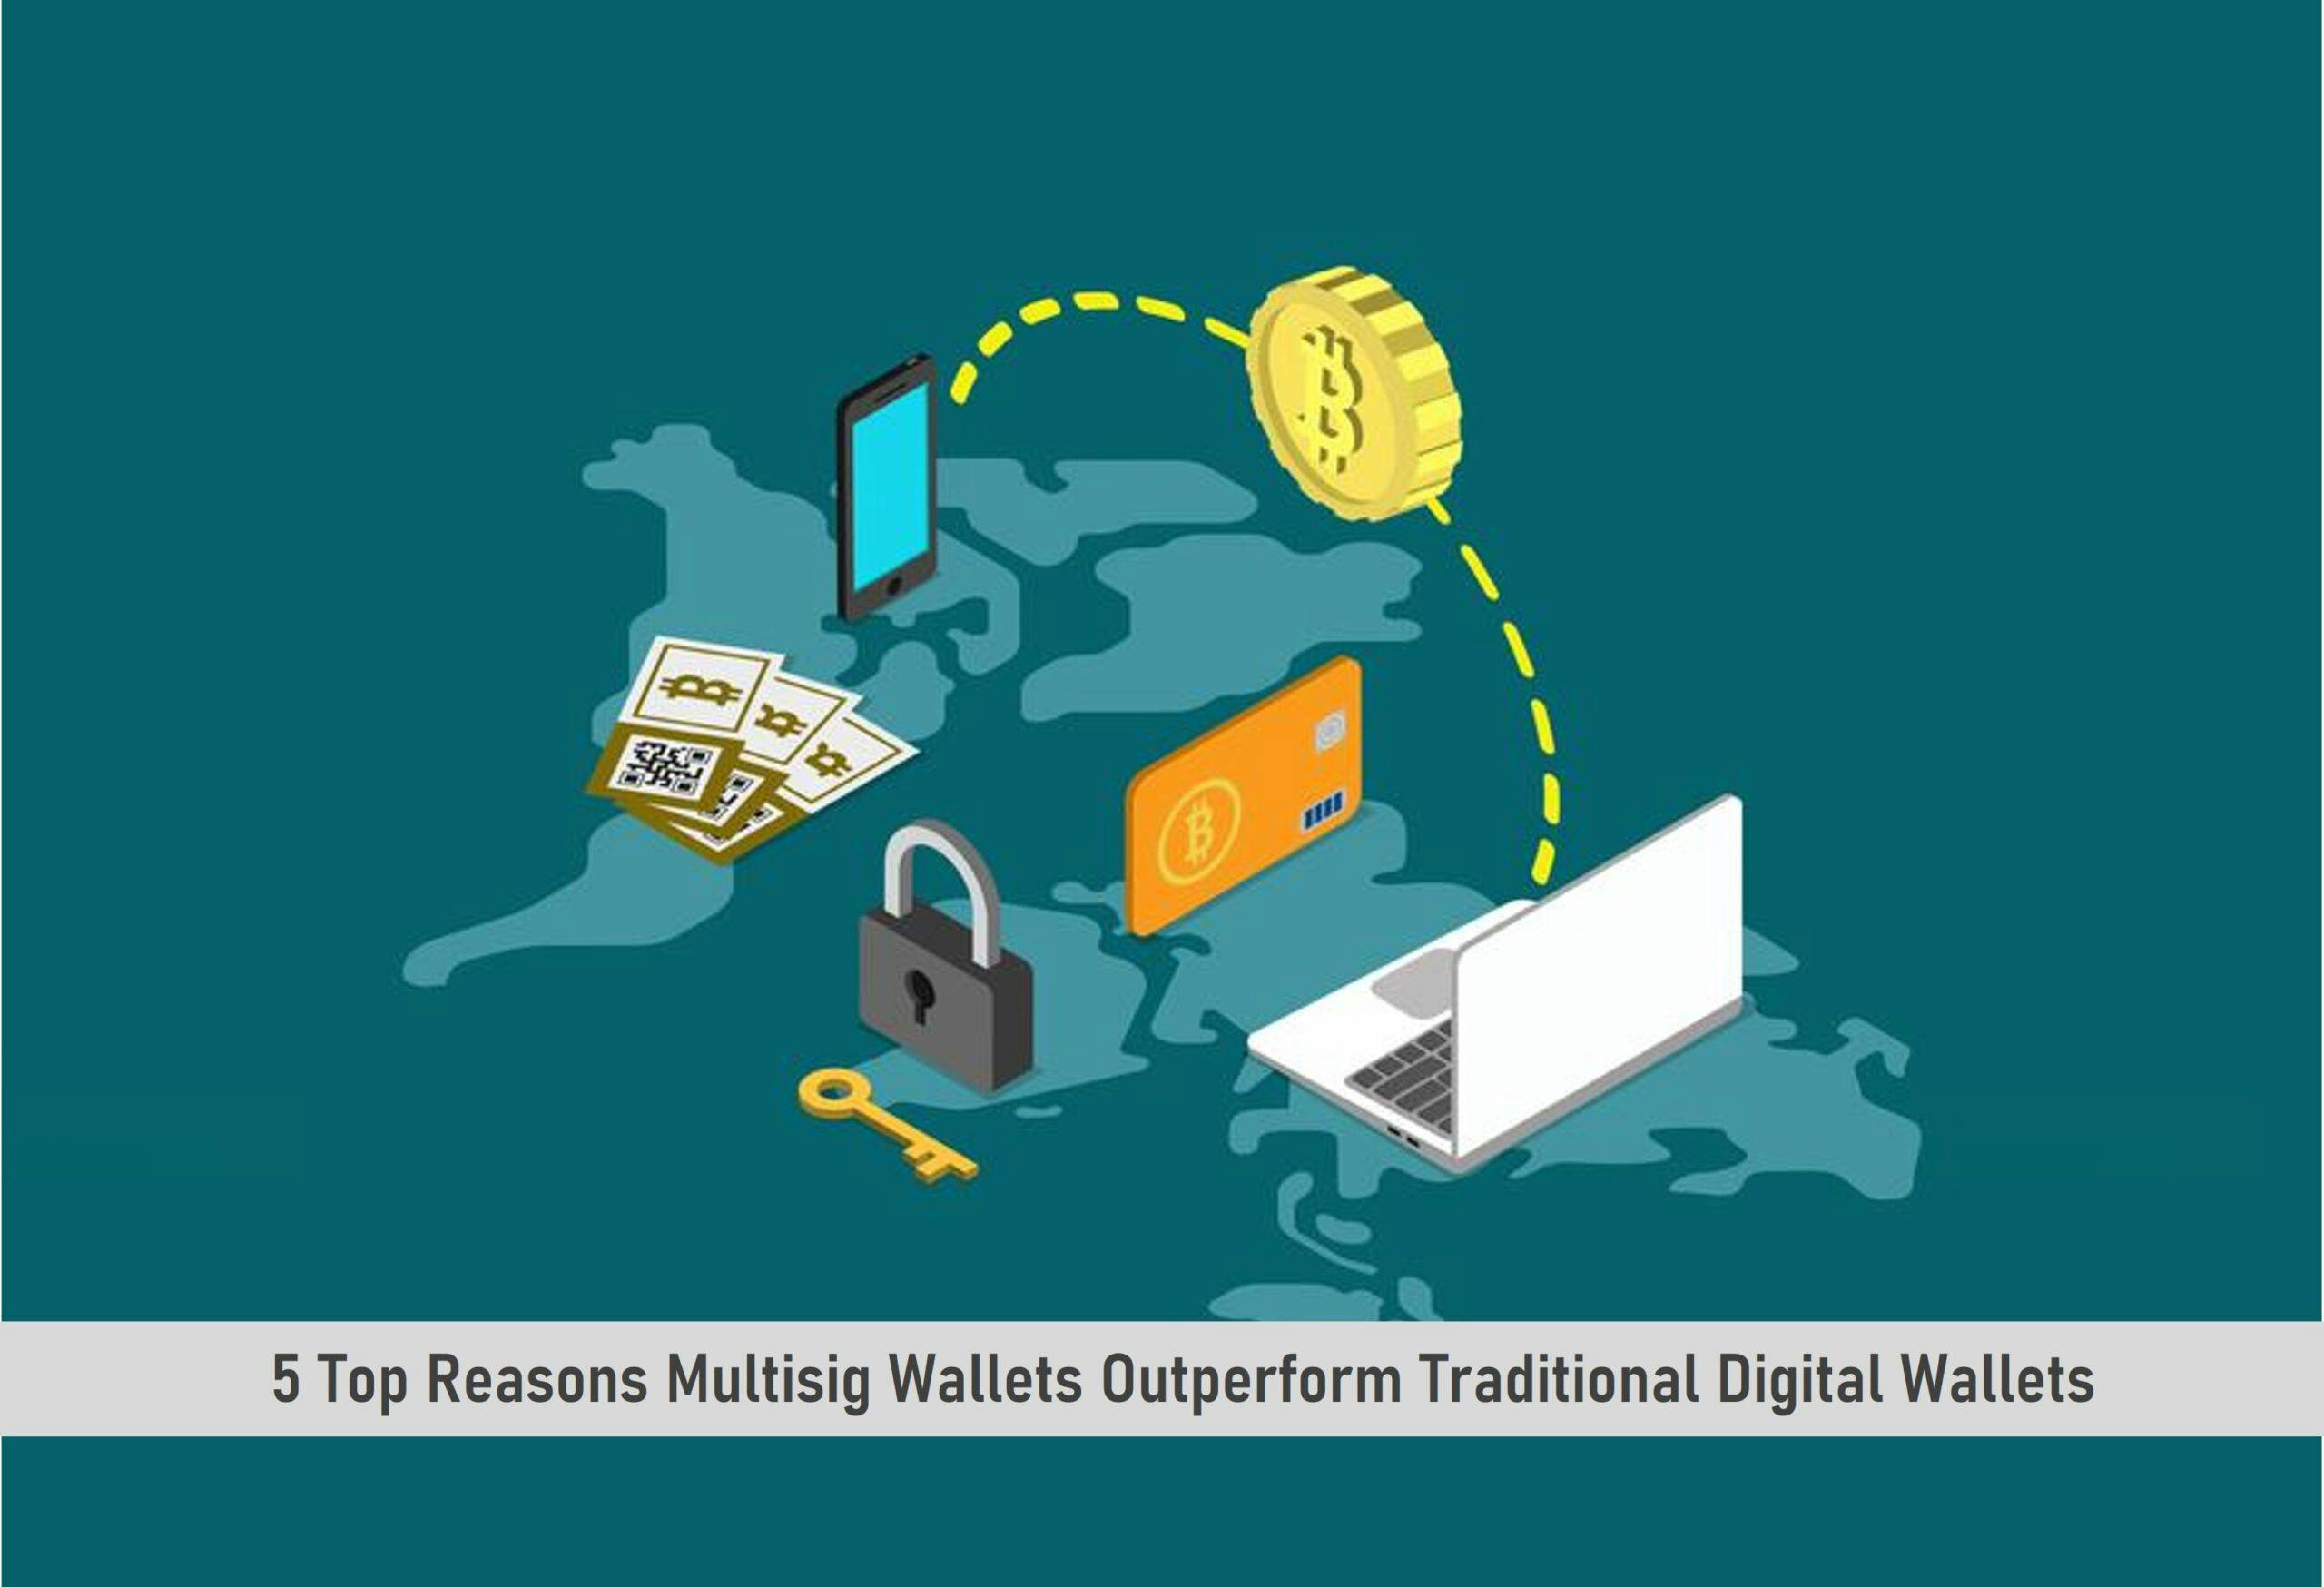 5 Top Reasons Multisig Wallets Outperform Traditional Digital Wallets